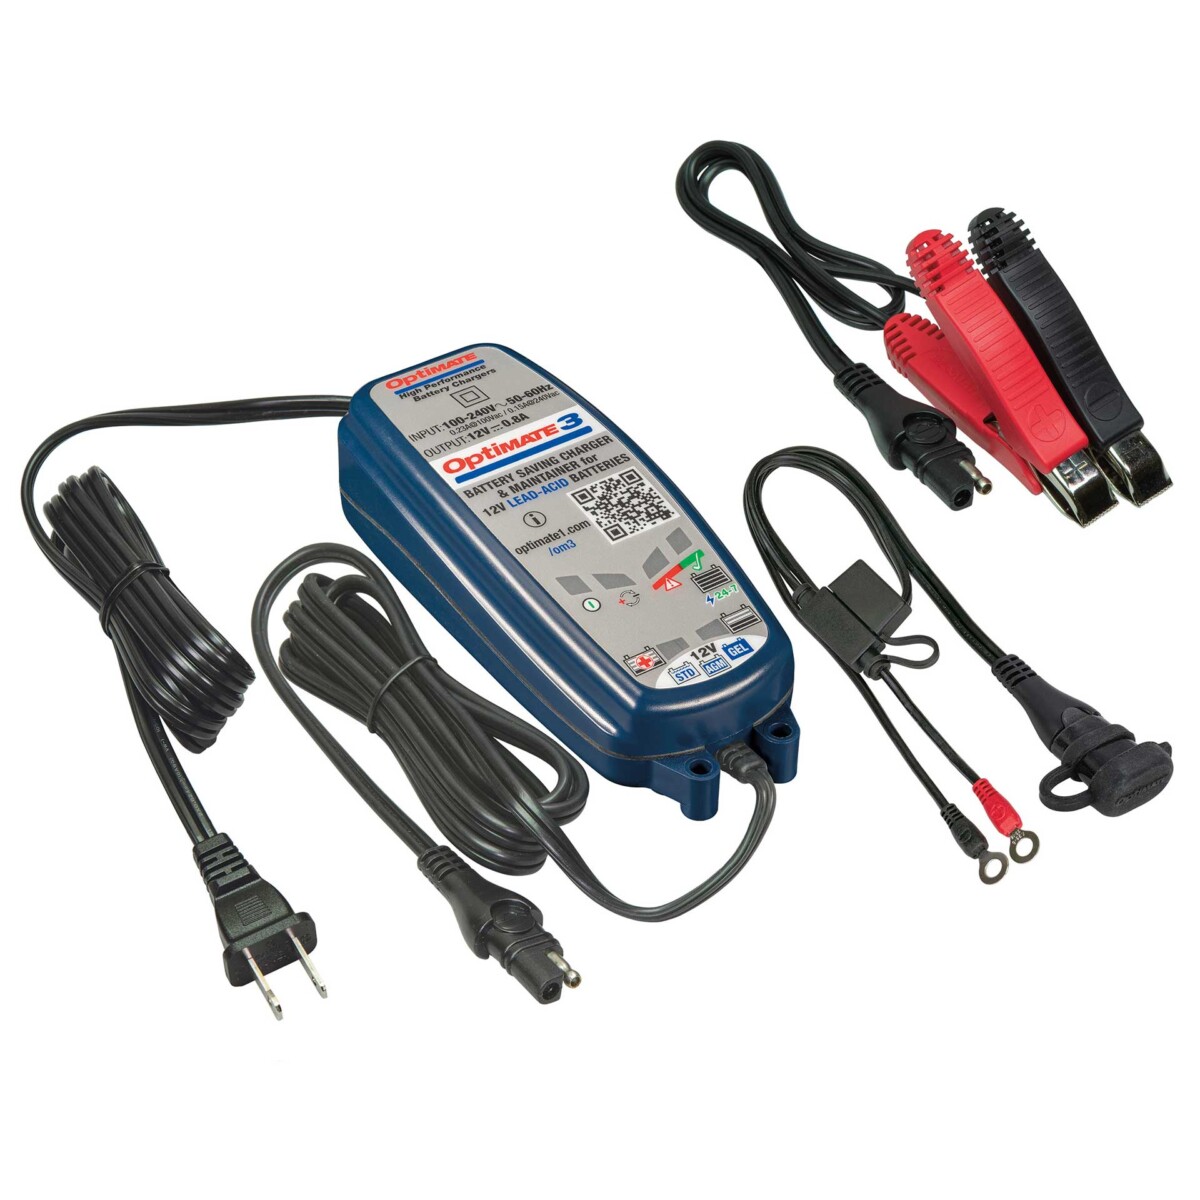 OptiMate 3 (EN) - The most trusted motorcycle battery saving charger. 